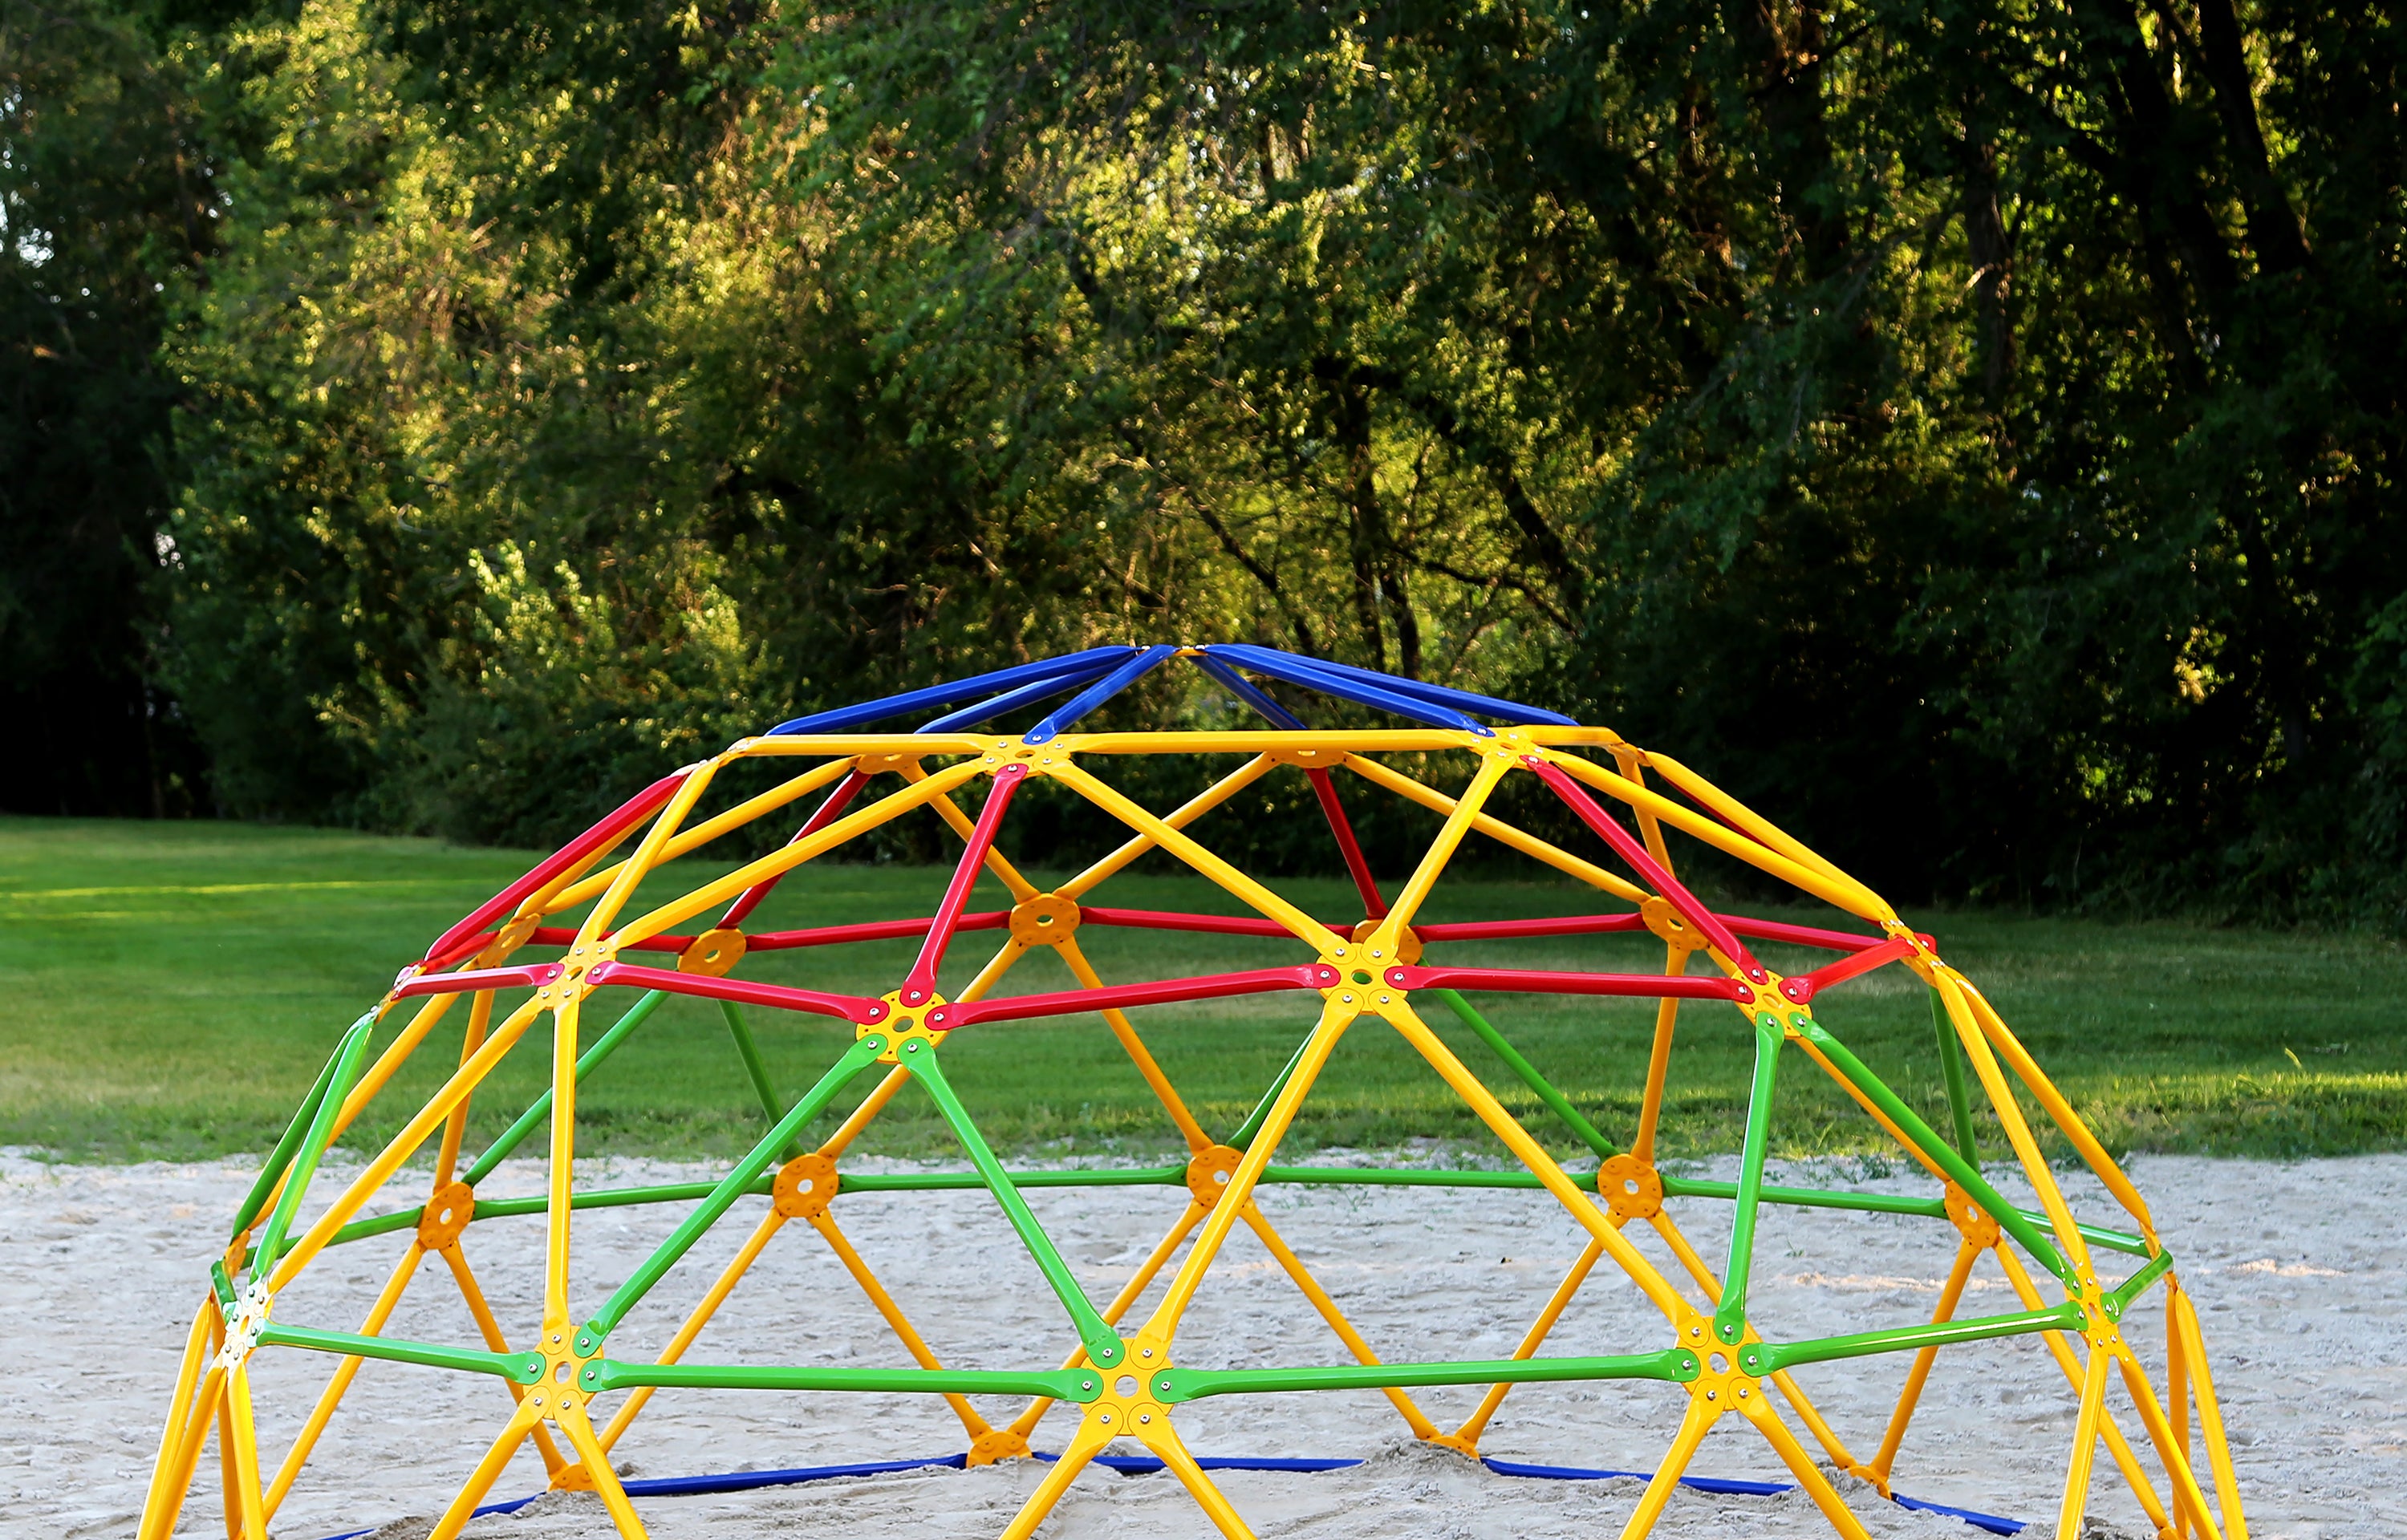 A young girl swinging on the inside of the colorful GeoDome.